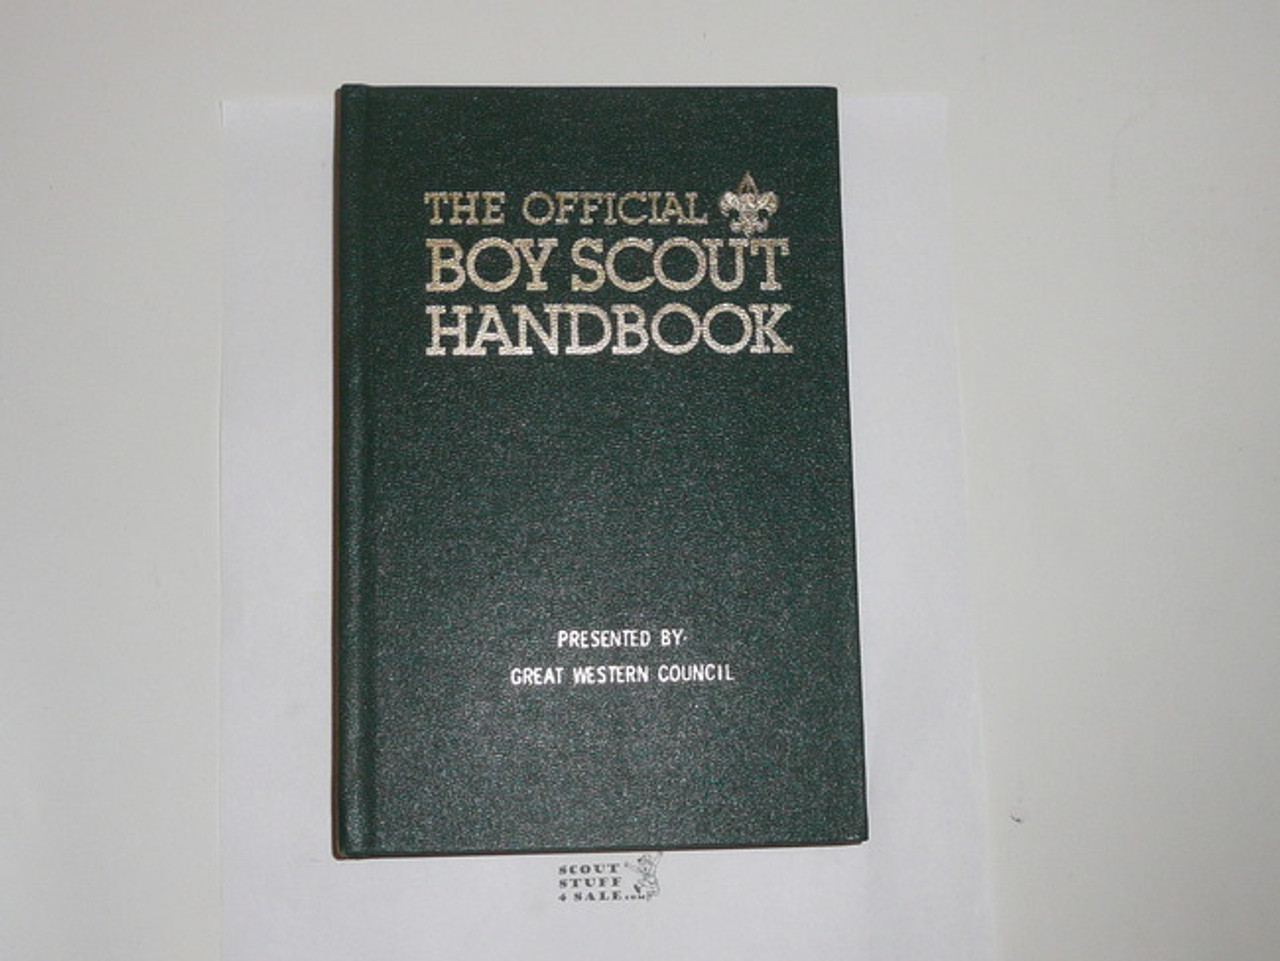 1979 Boy Scout Handbook, Ninth Edition, First Printing, RARE presentation hardbound copy, MINT condition, inscribed by Scout Executive